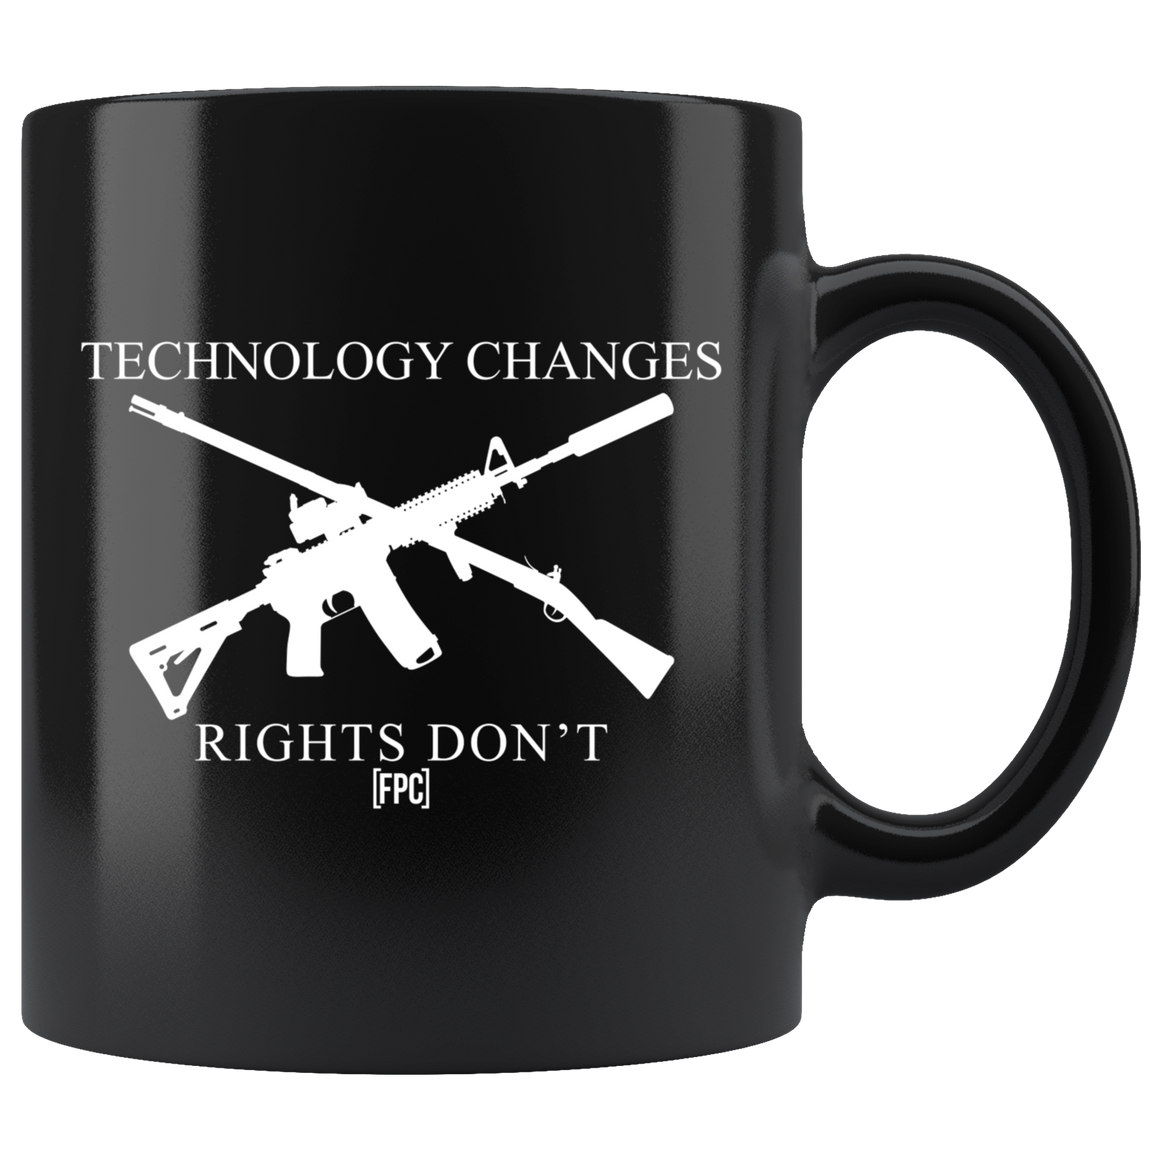 Technology Changes - Rights Don't Mug